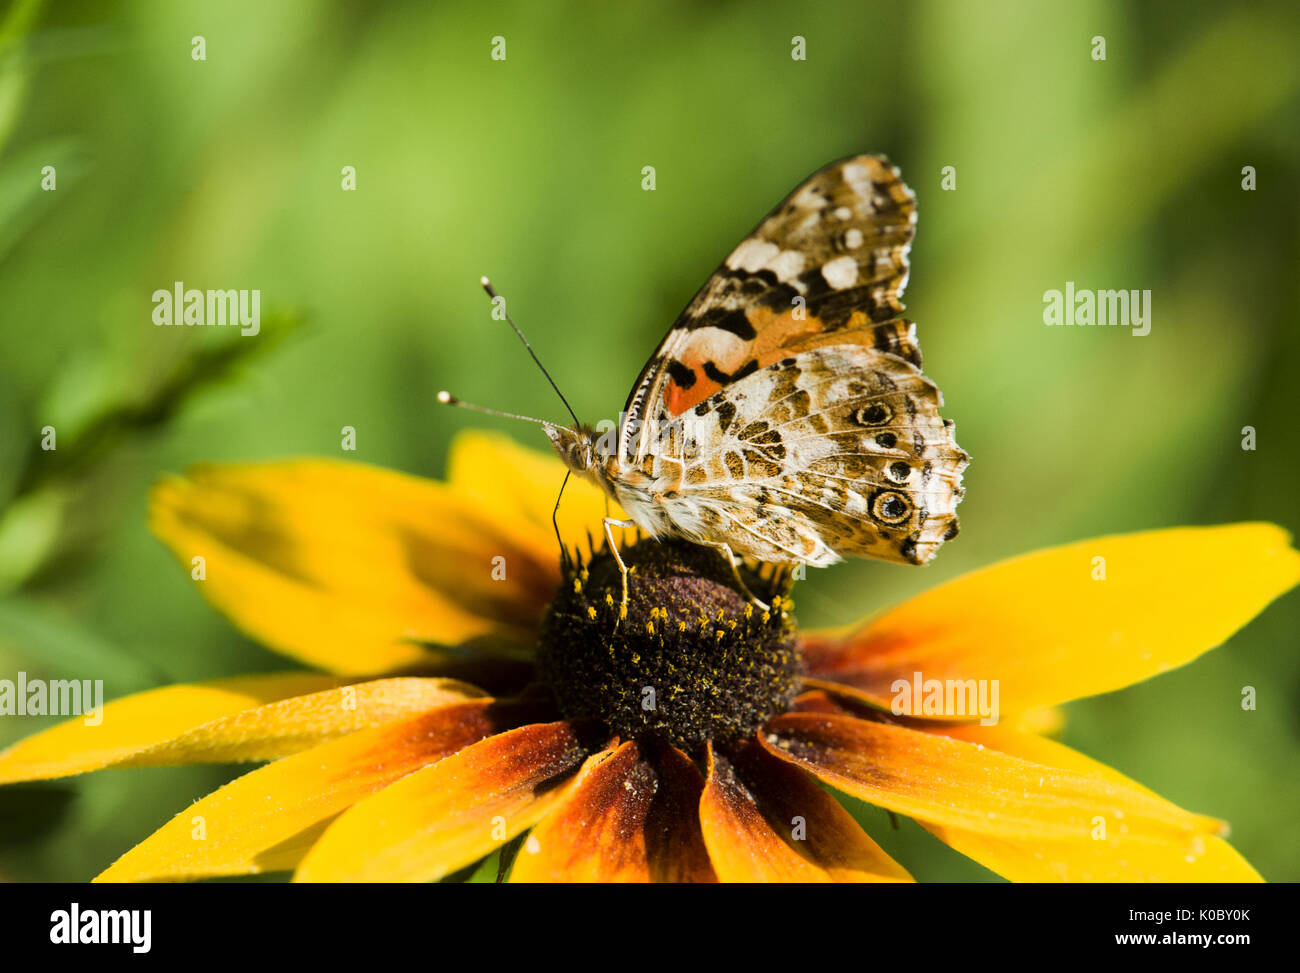 Butterfly on a flower against a nature background Stock Photo